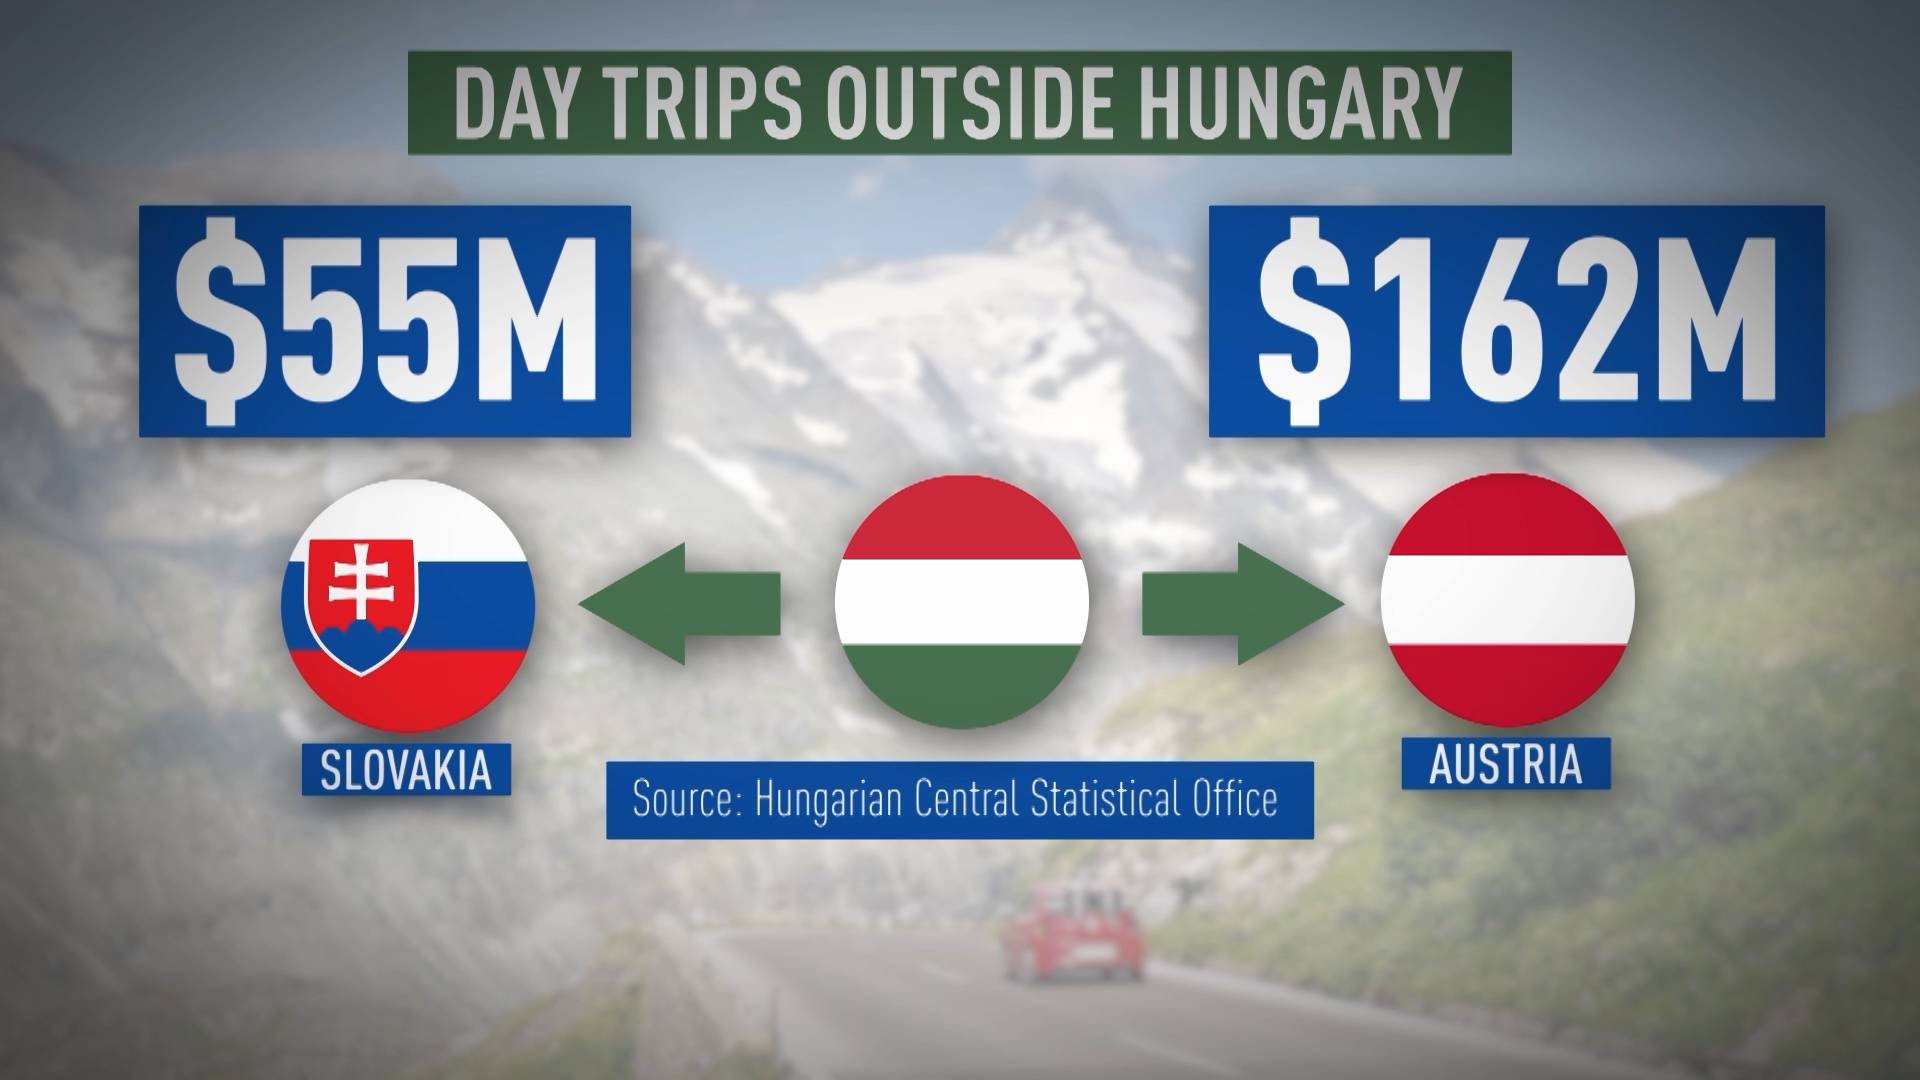 Hungarians border-hop for cheaper groceries to beat rocketing food inflation